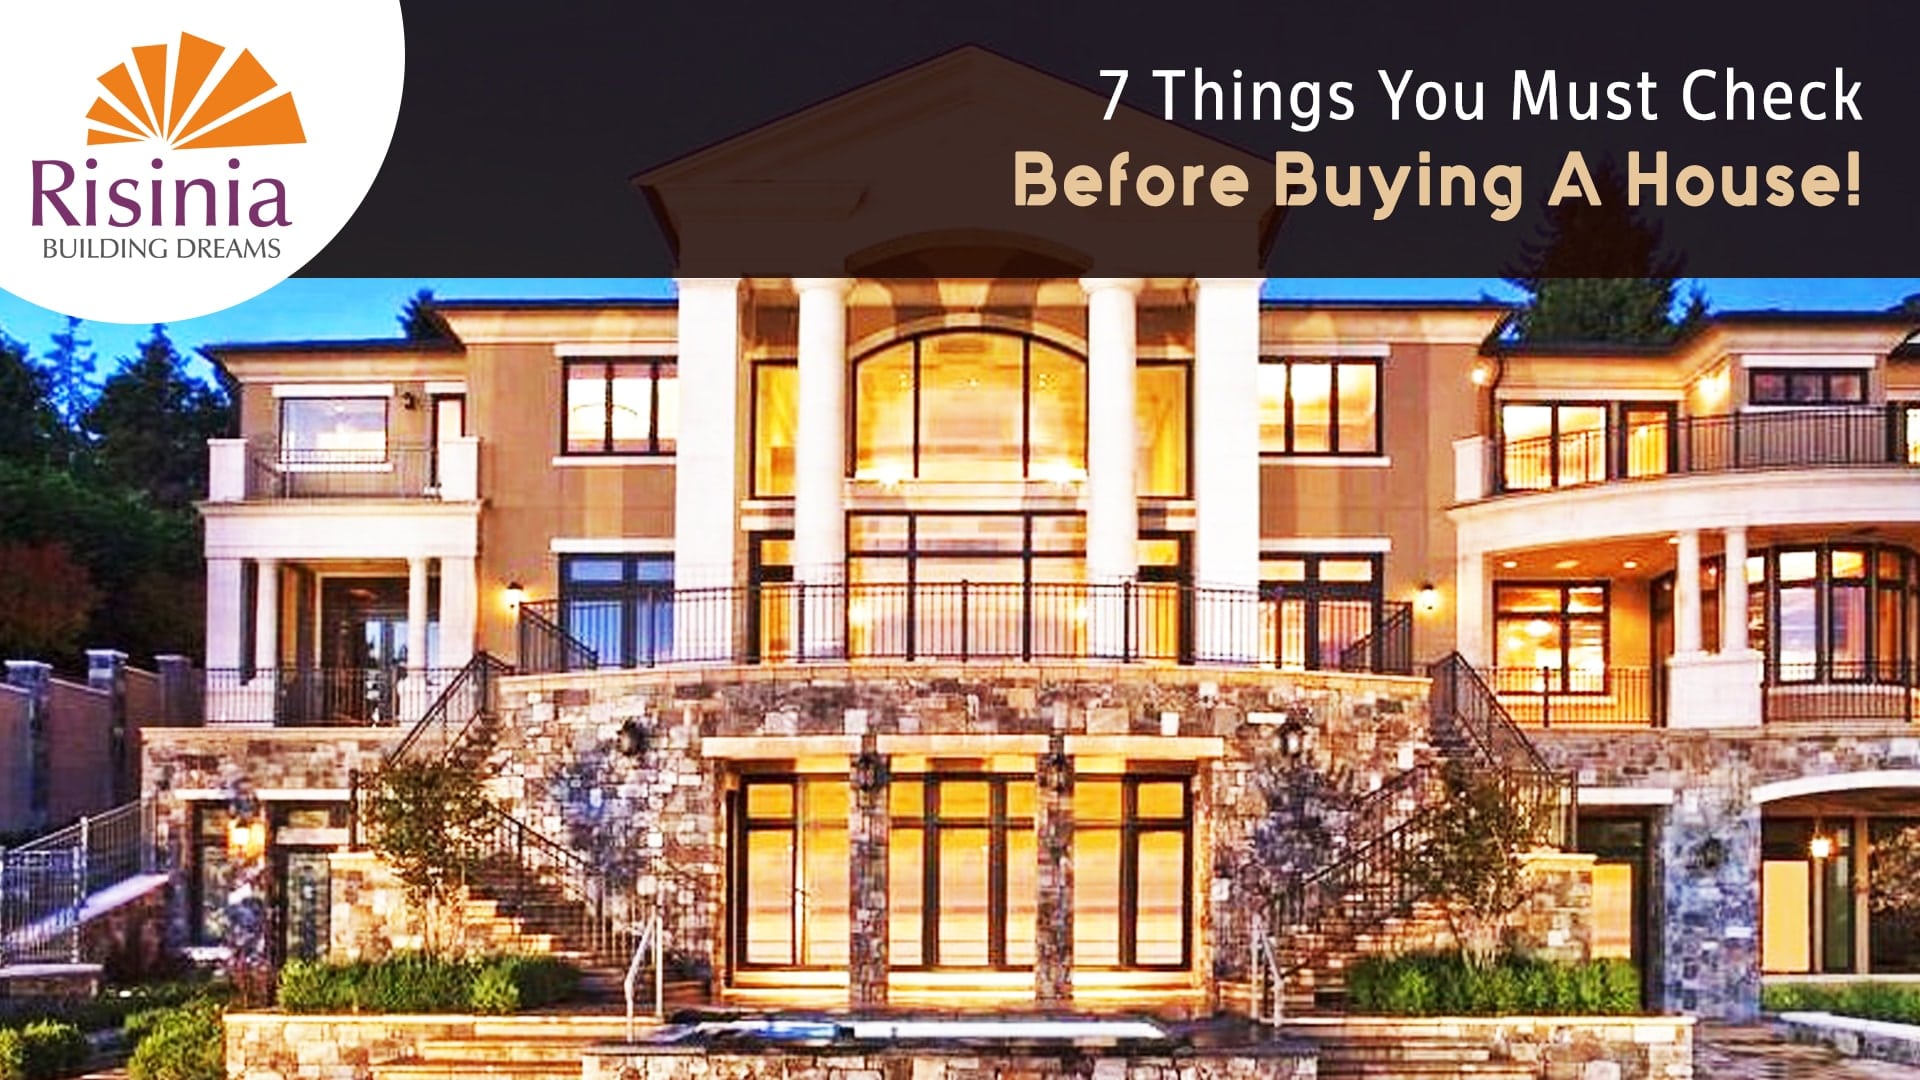 7 Things you must check before buying a house